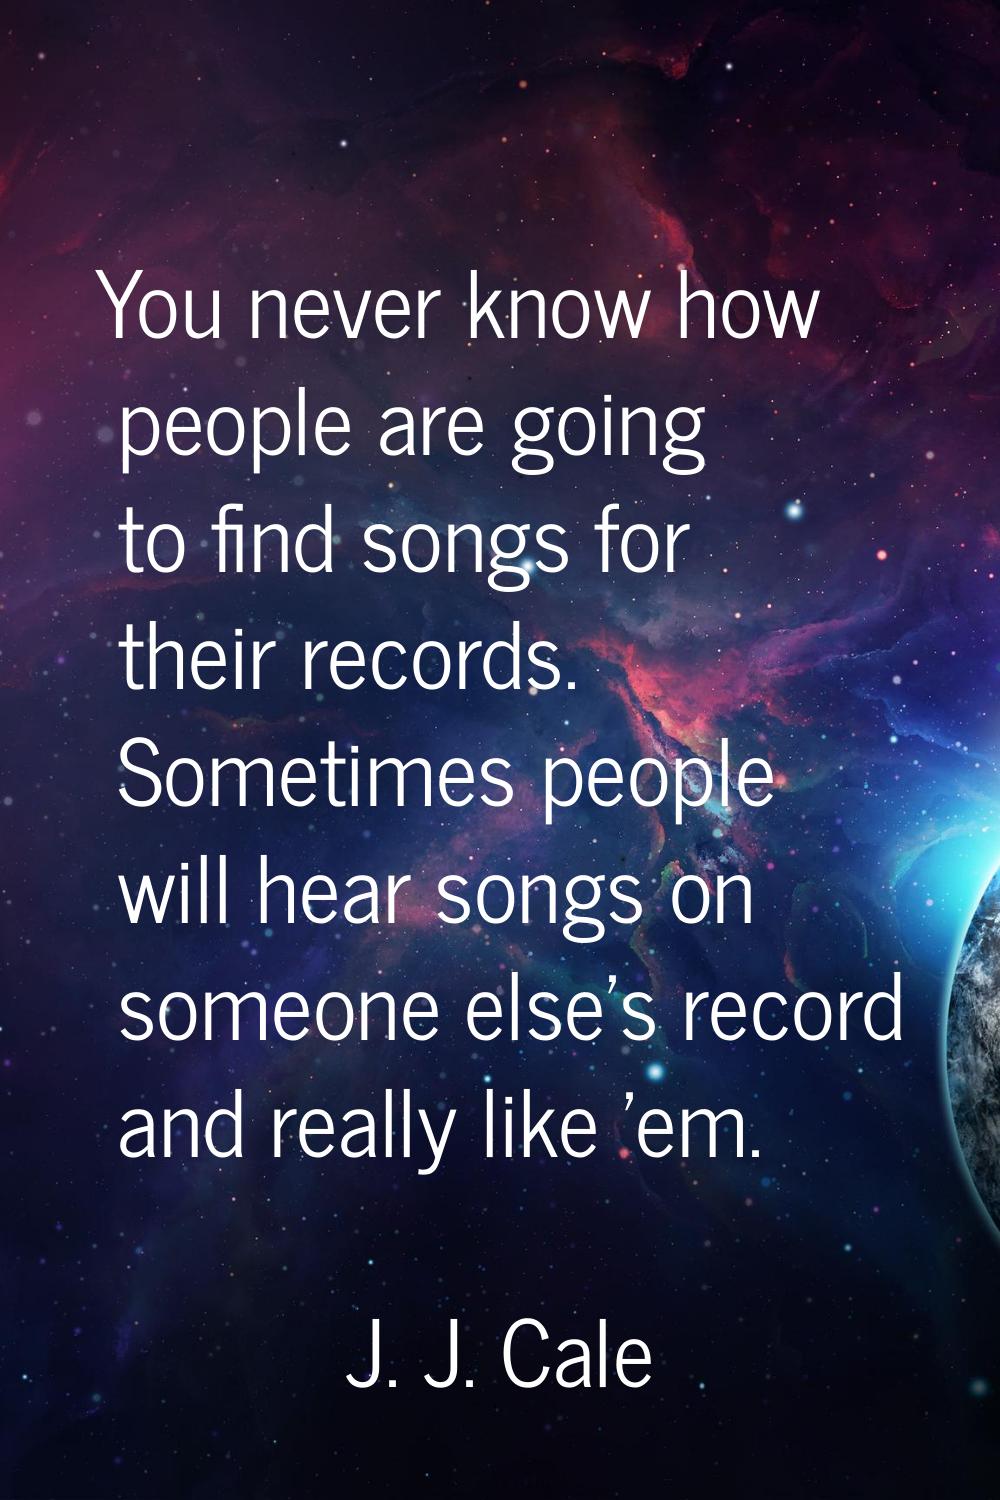 You never know how people are going to find songs for their records. Sometimes people will hear son